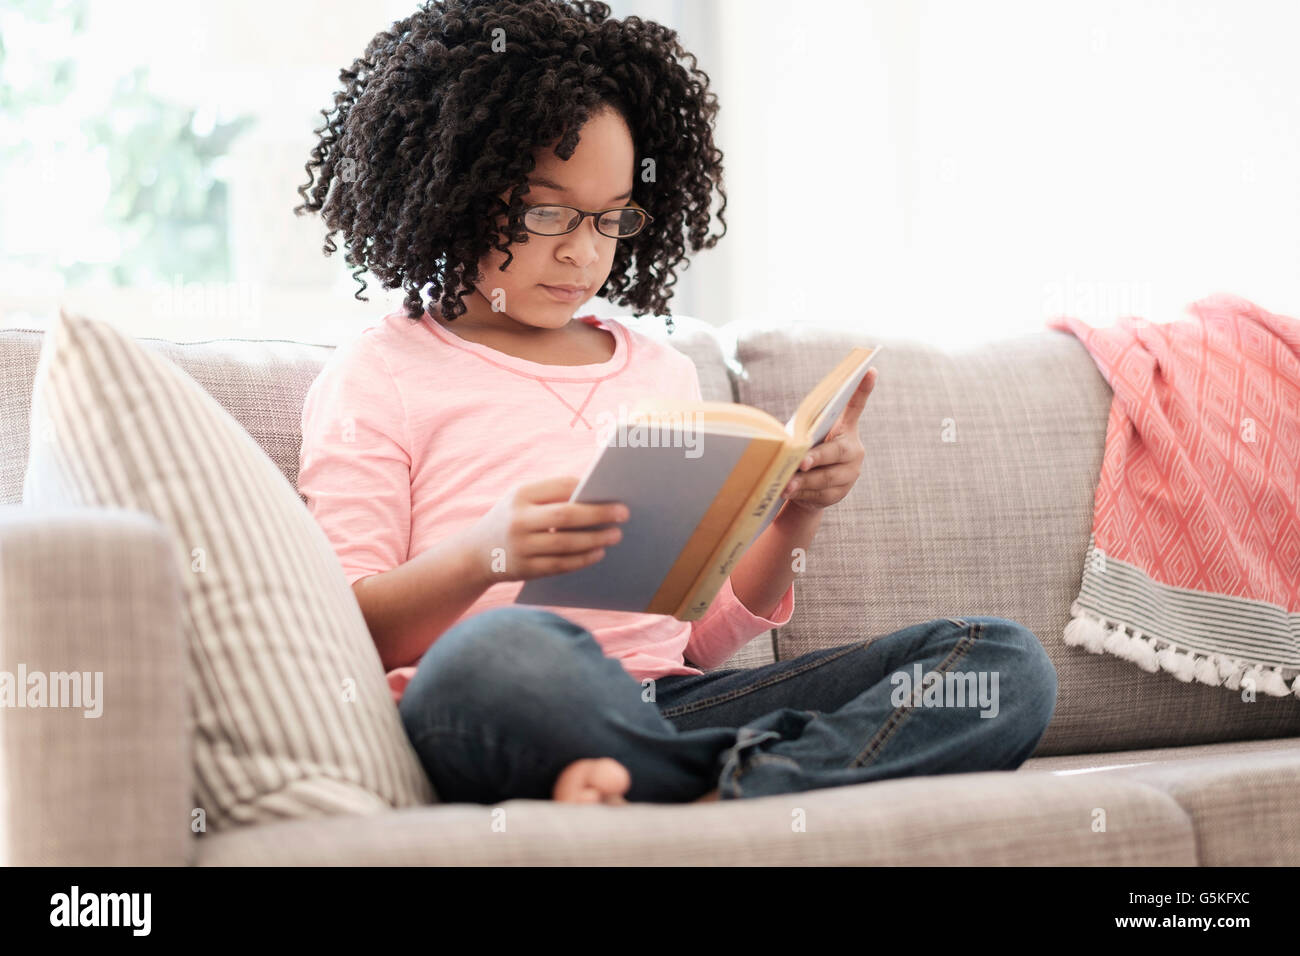 African American girl reading book on sofa Stock Photo